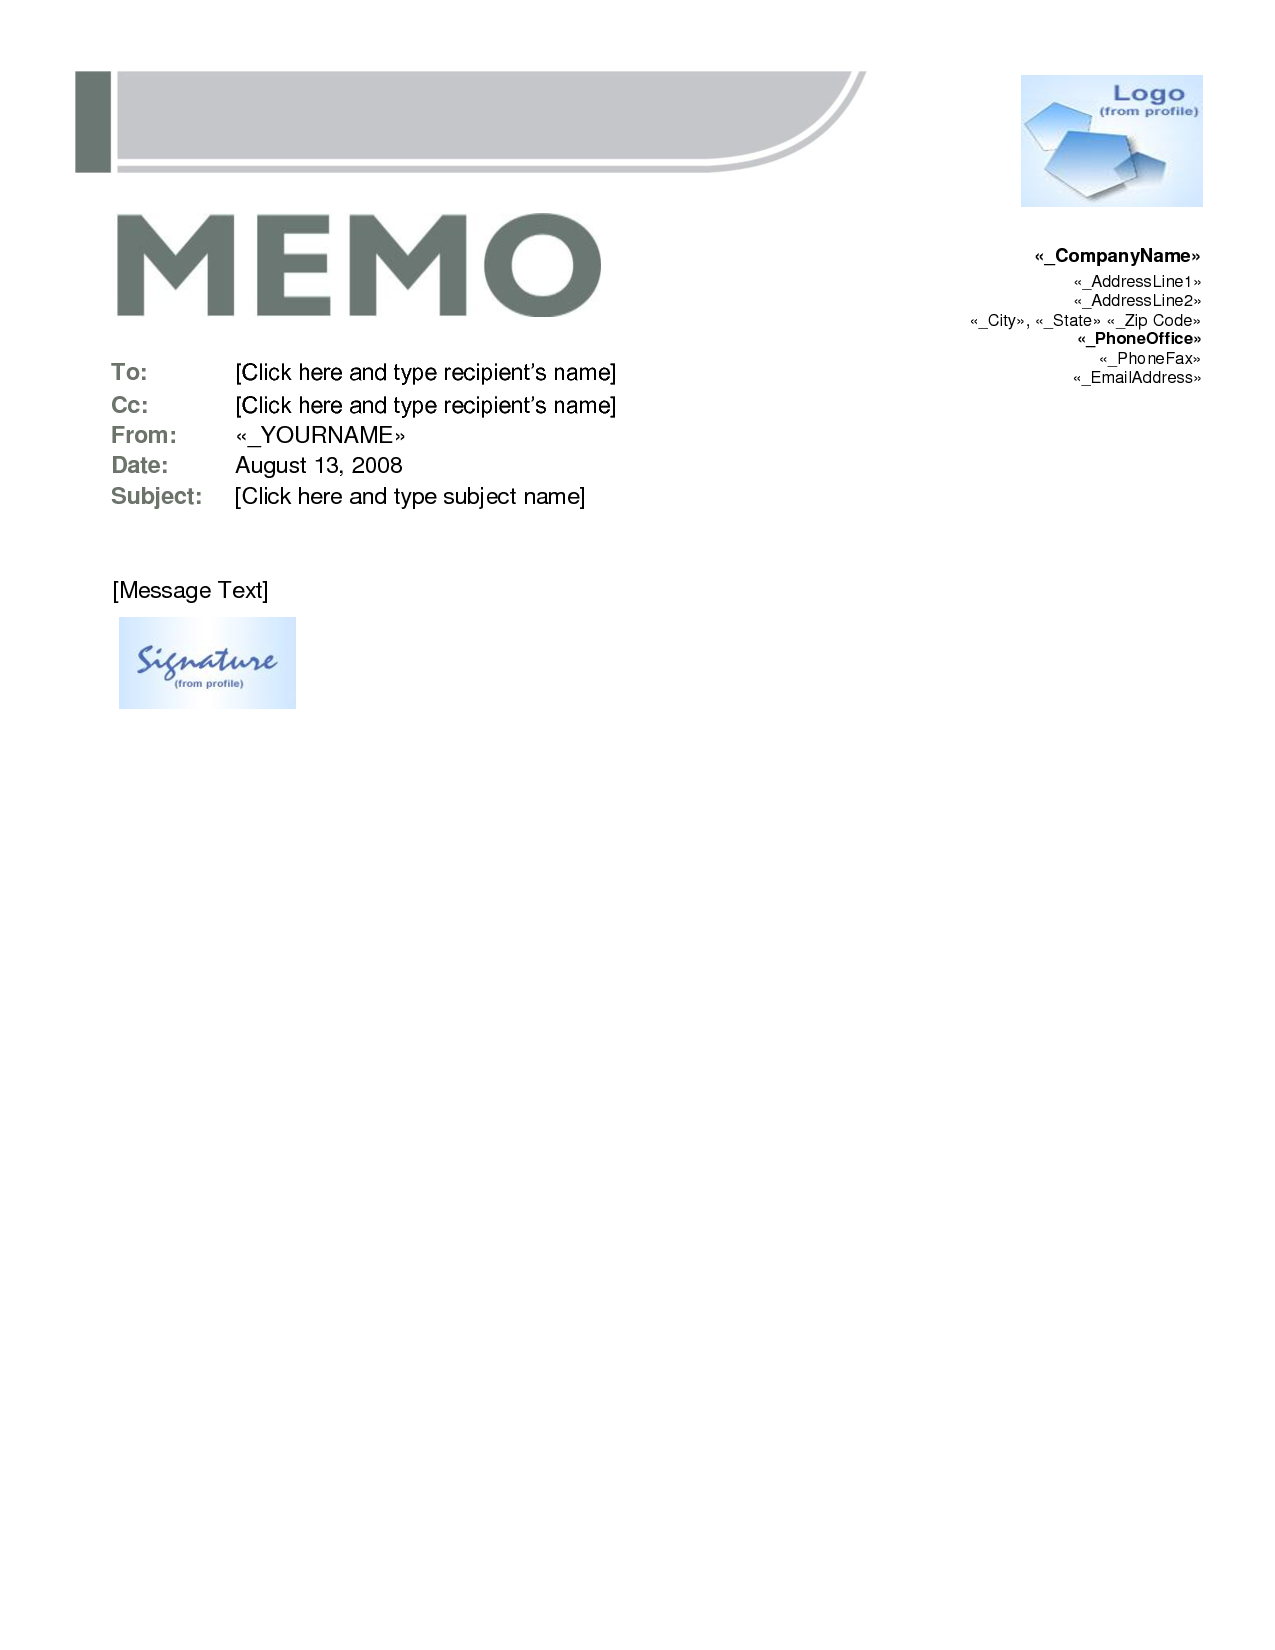 005 Microsoft Word Memo Template 421399 Templates For Throughout Memo Template Word 2013